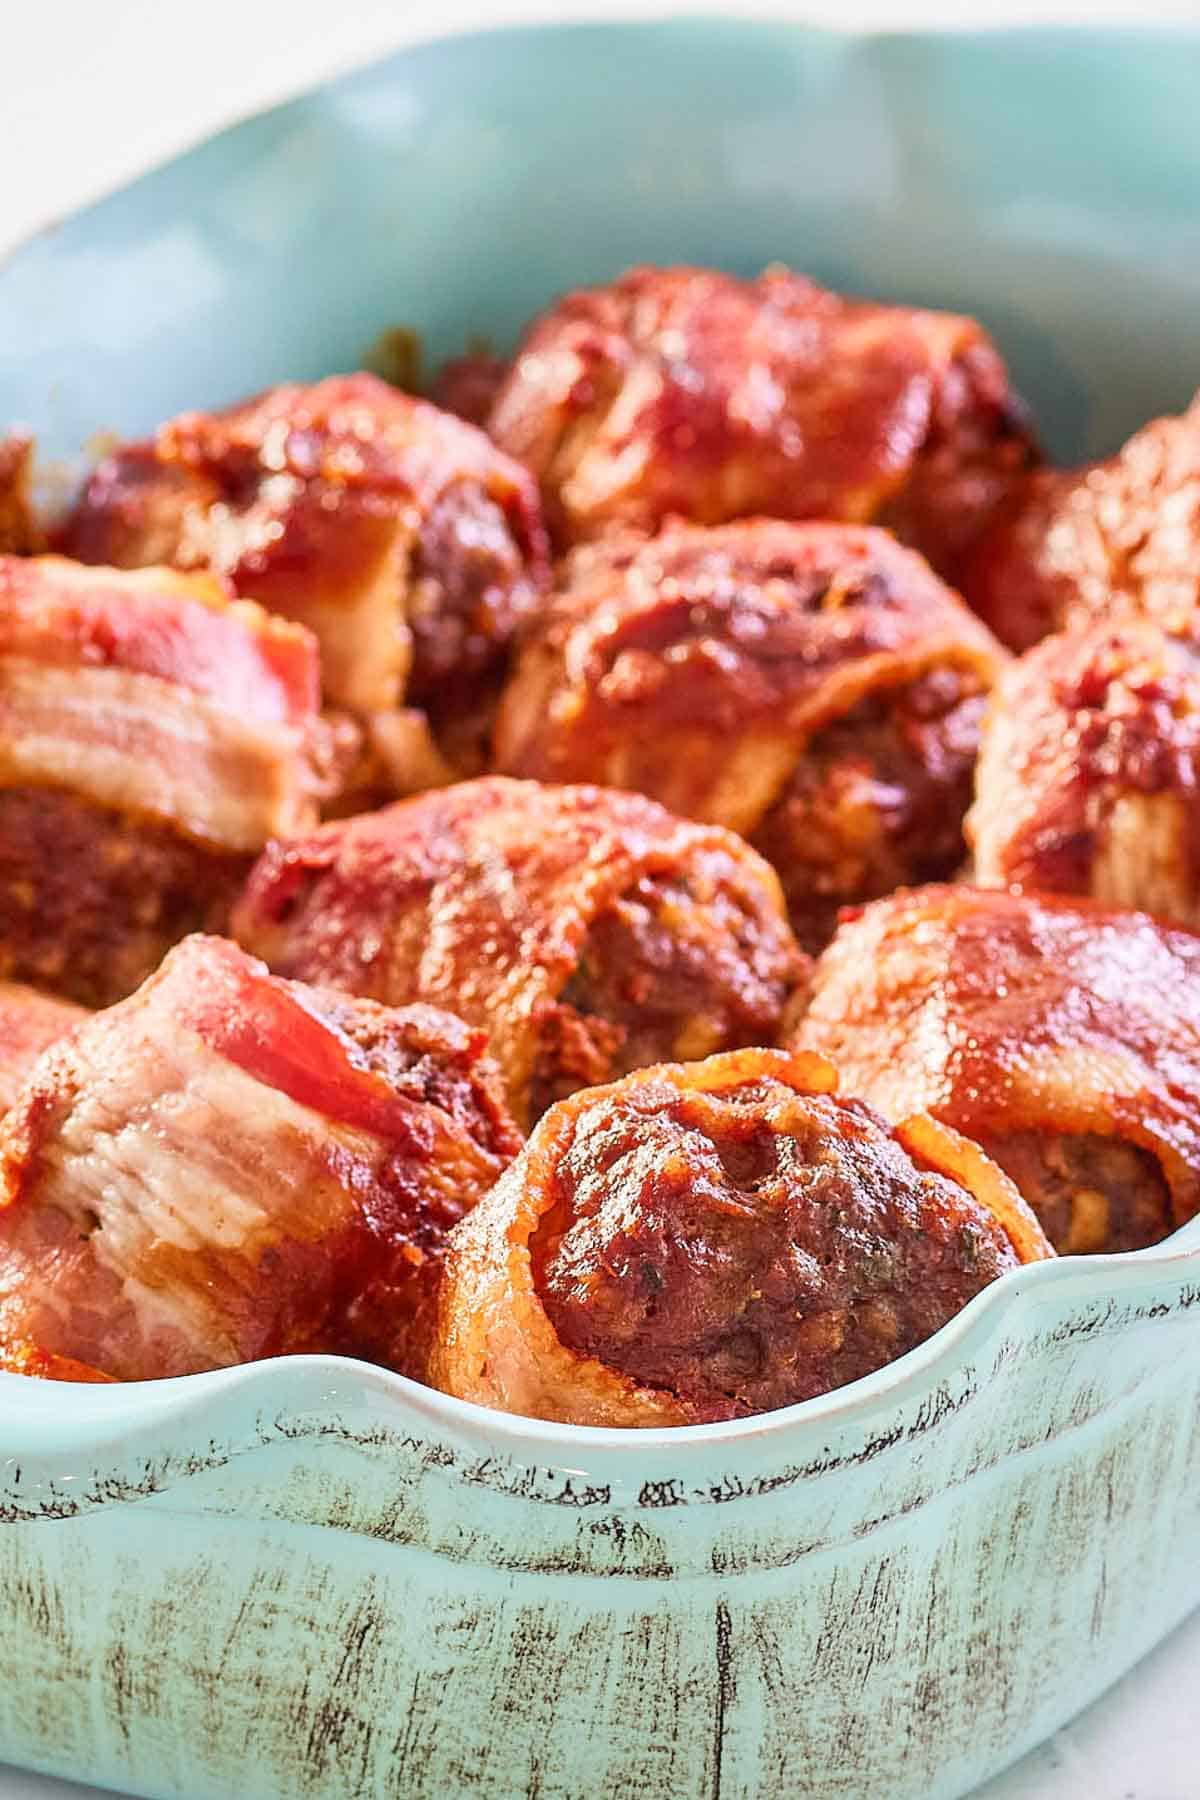 Bacon-wrapped smoked meatballs with BBQ sauce in a blue serving dish.